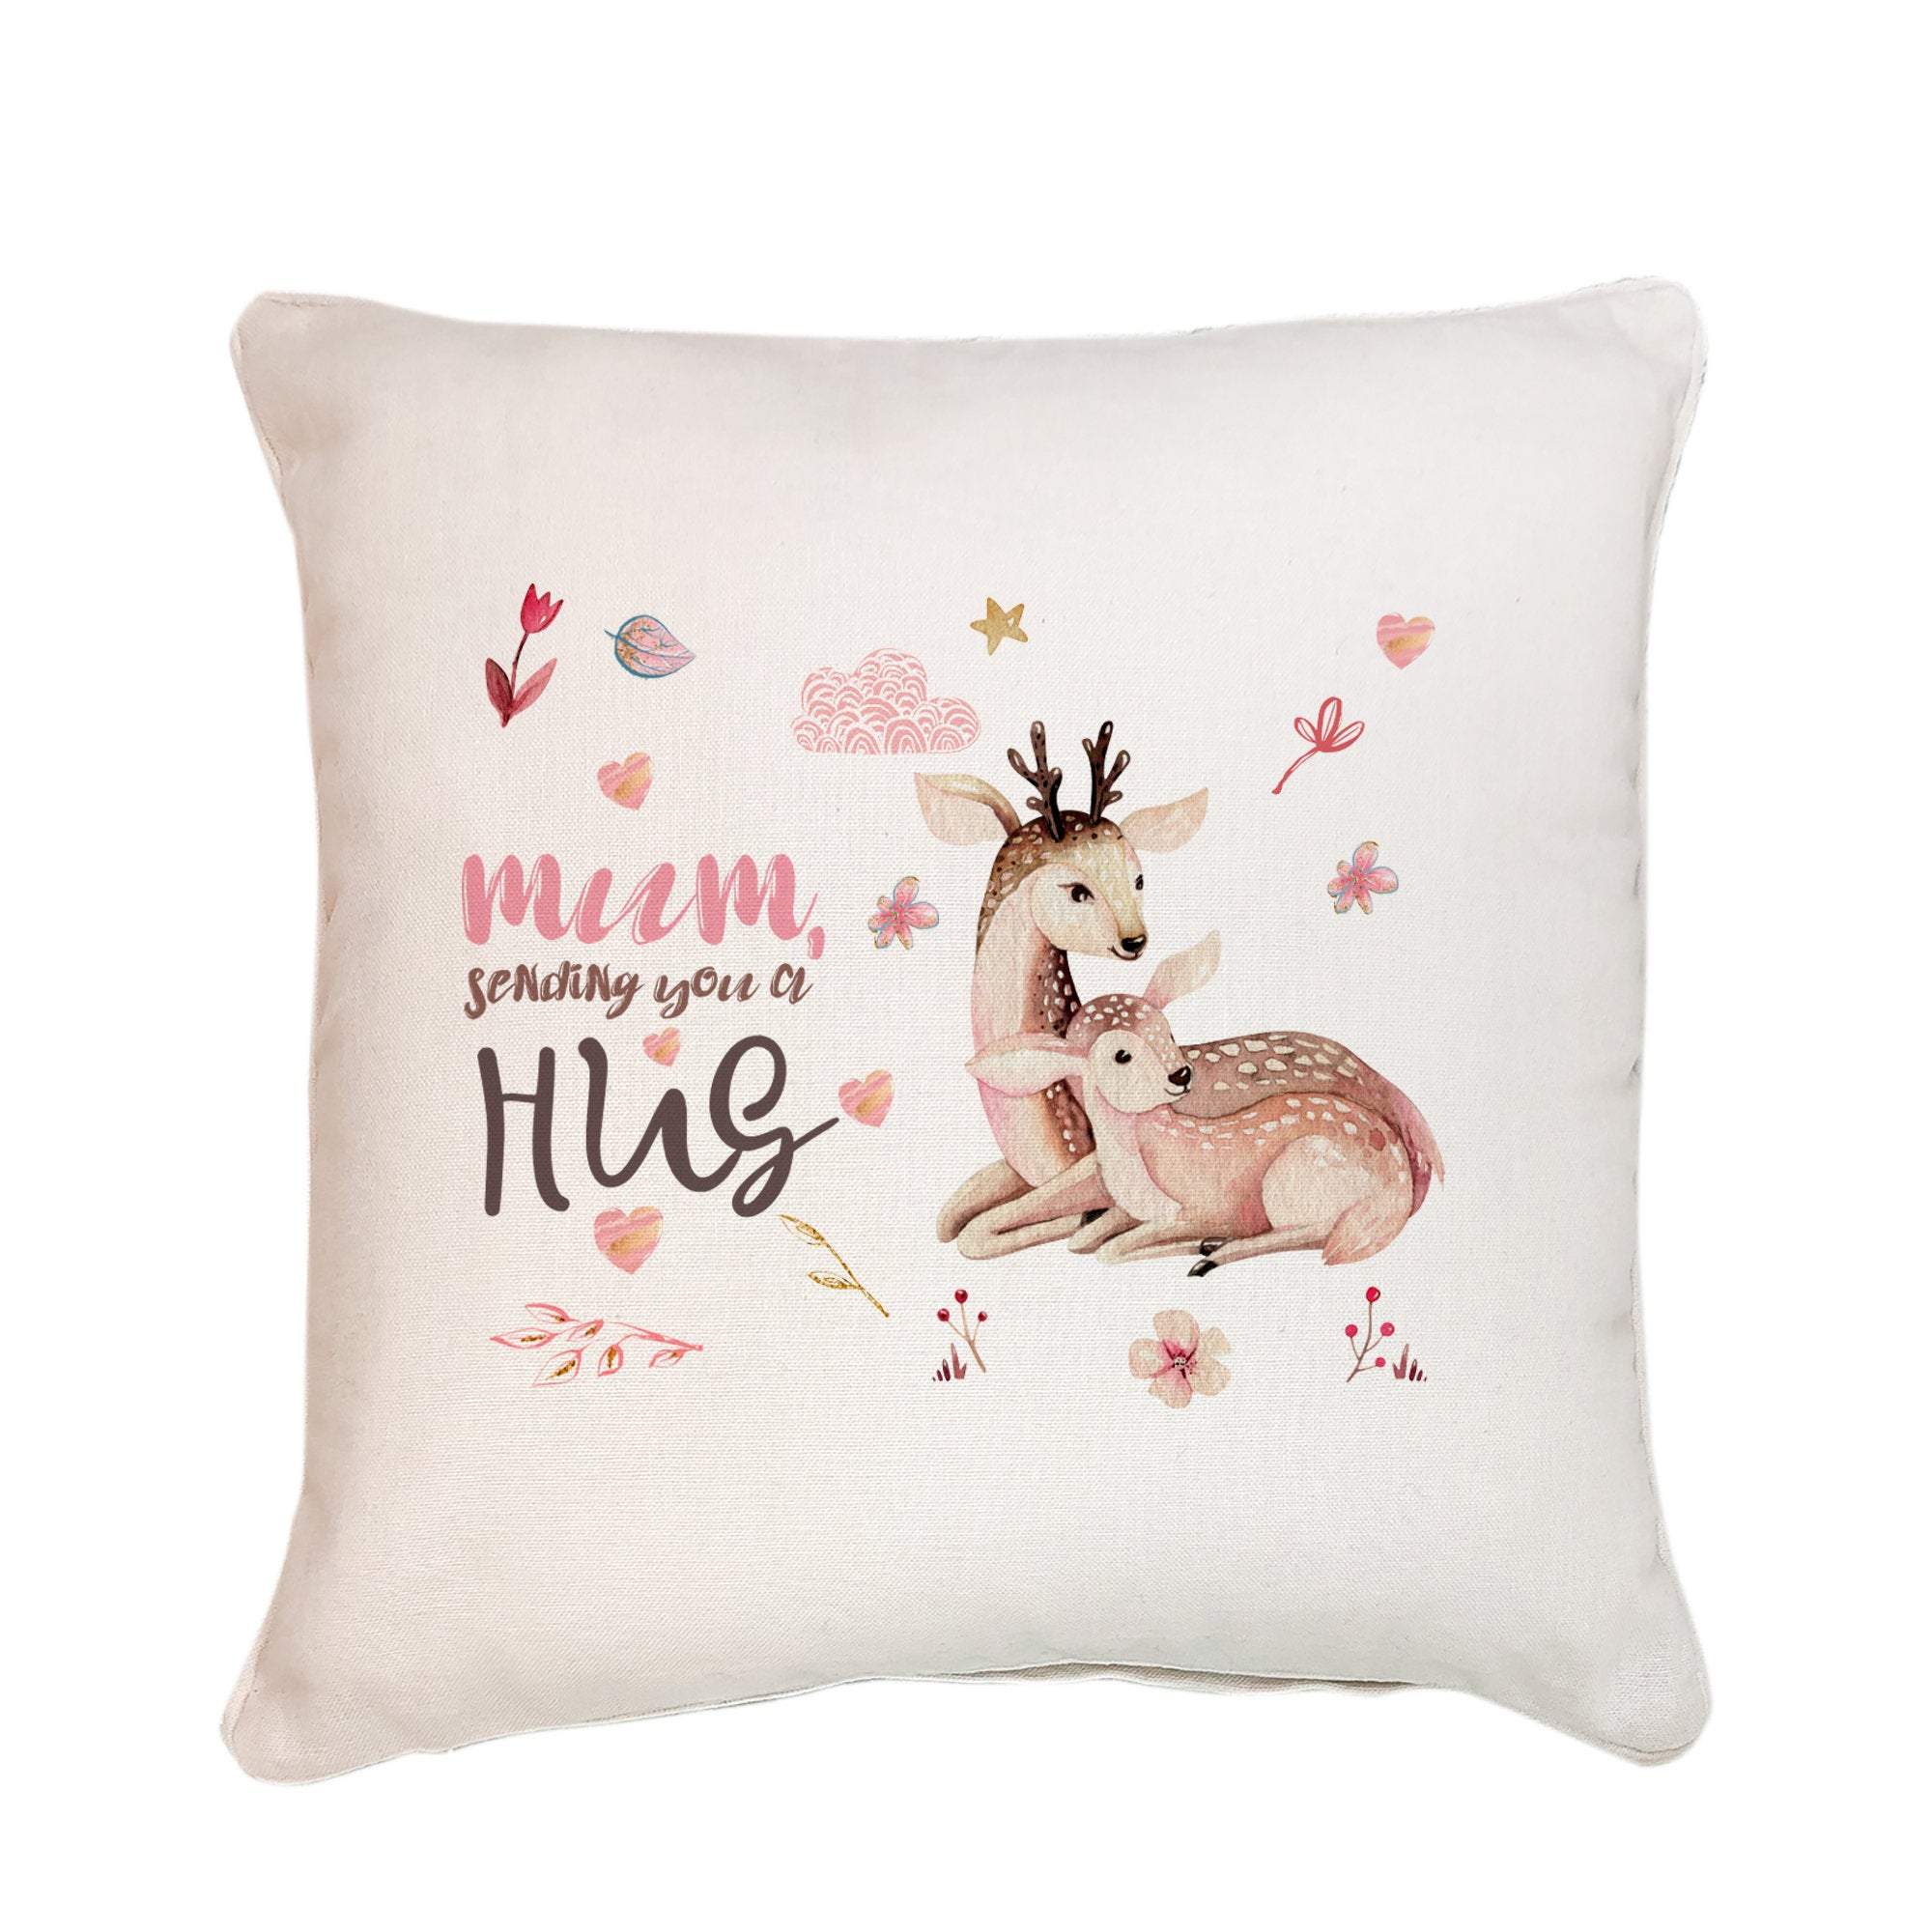 Mum sending you a hug cushion, Mother's Day Gift, Mom and baby, Mummy Birthday Gift